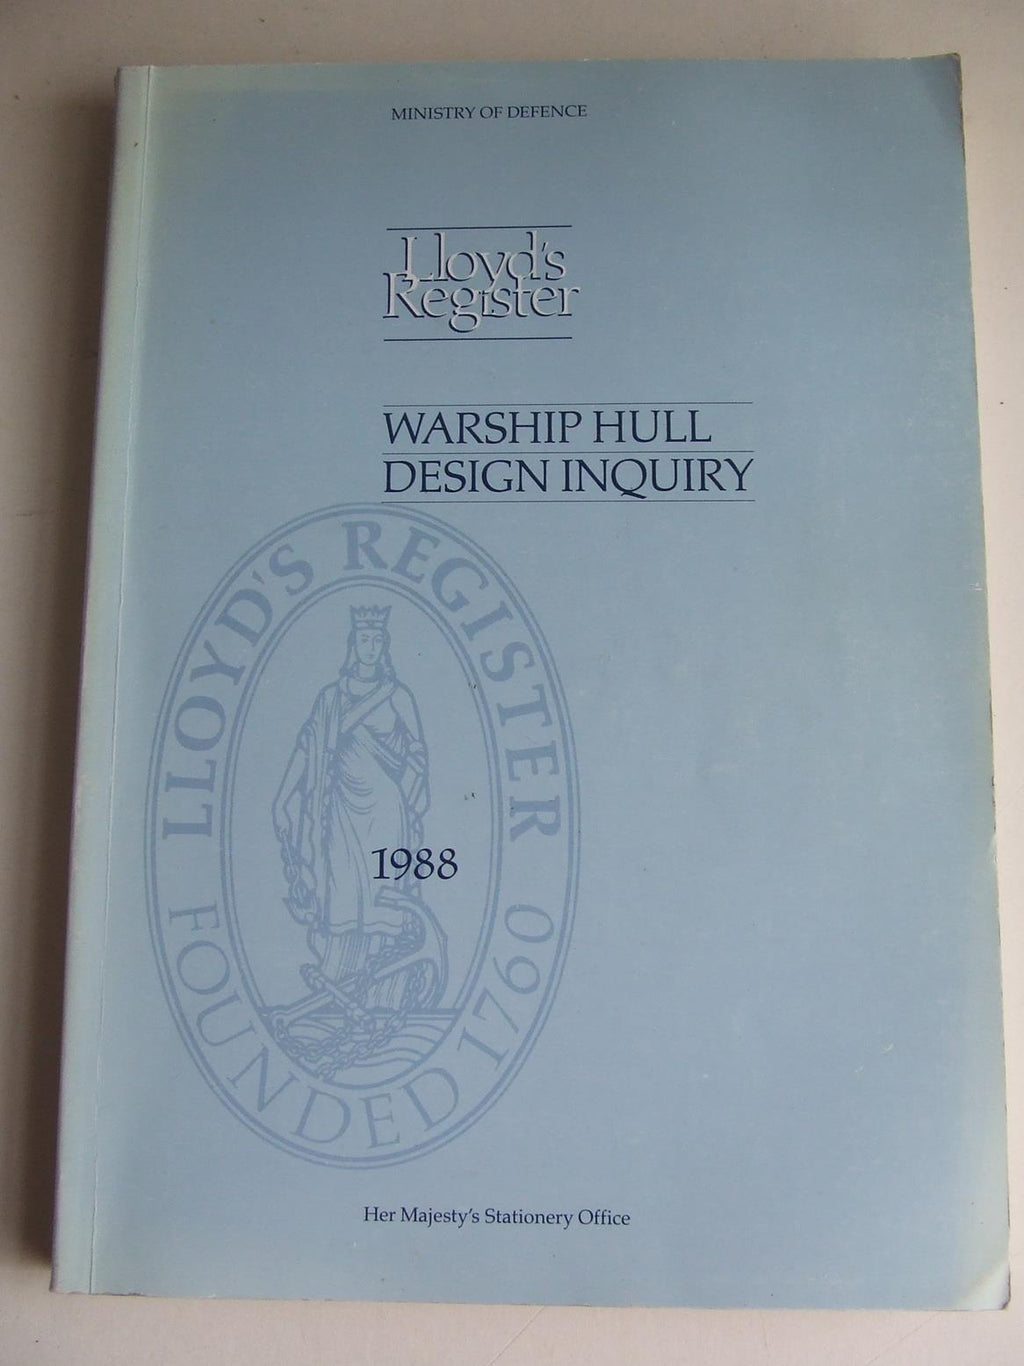 Report on the Inquiry into Hull Forms for Warships